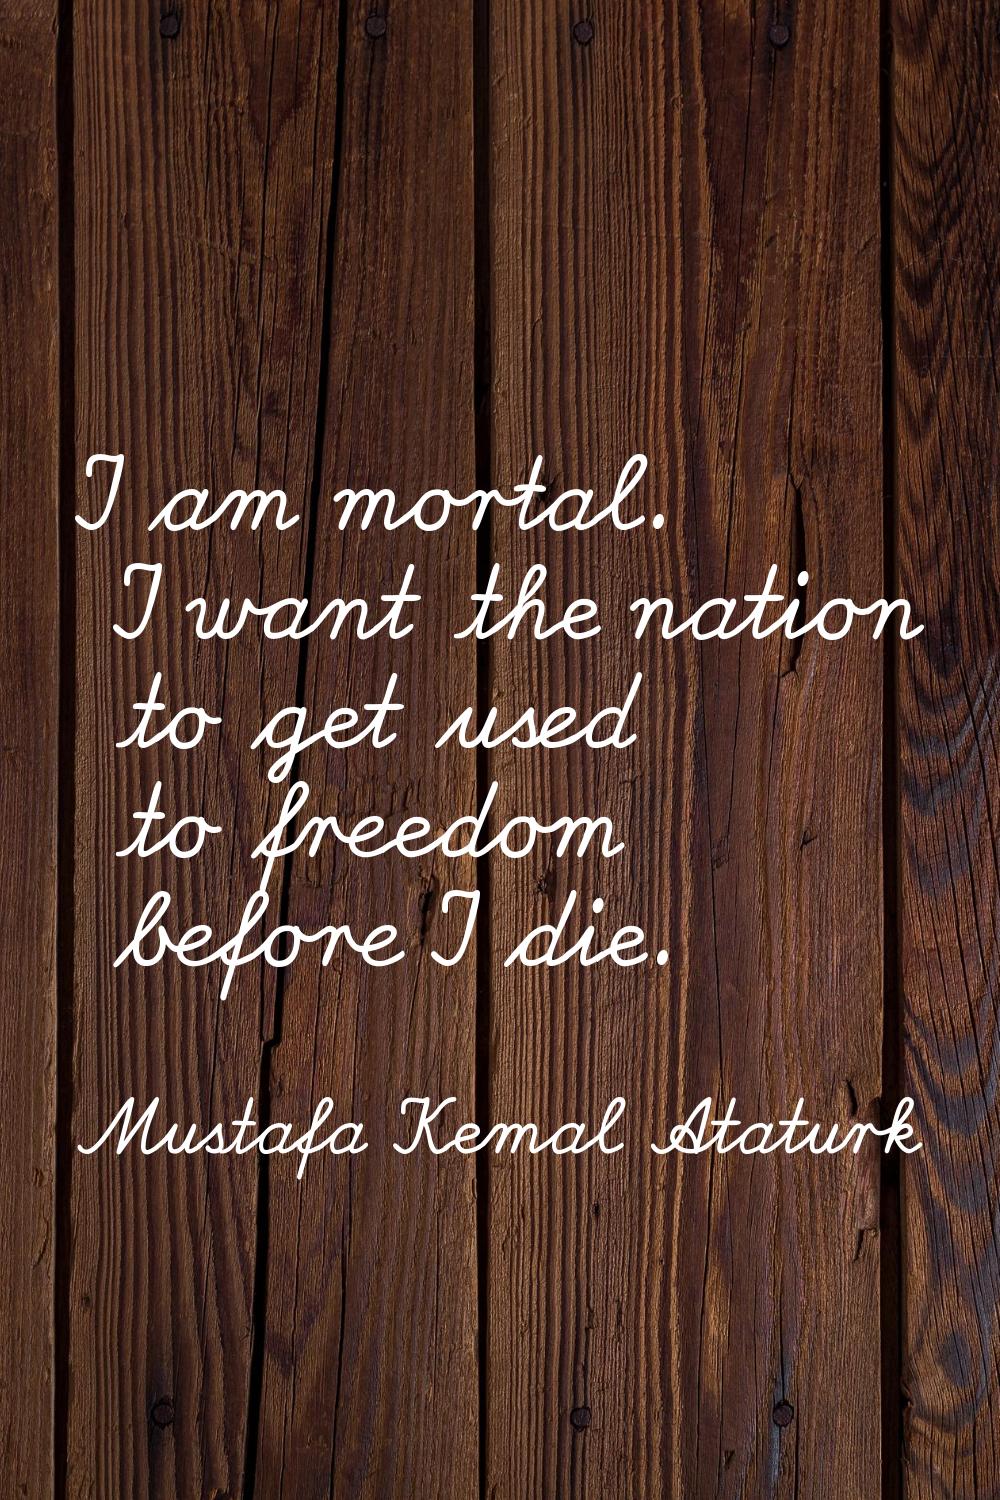 I am mortal. I want the nation to get used to freedom before I die.